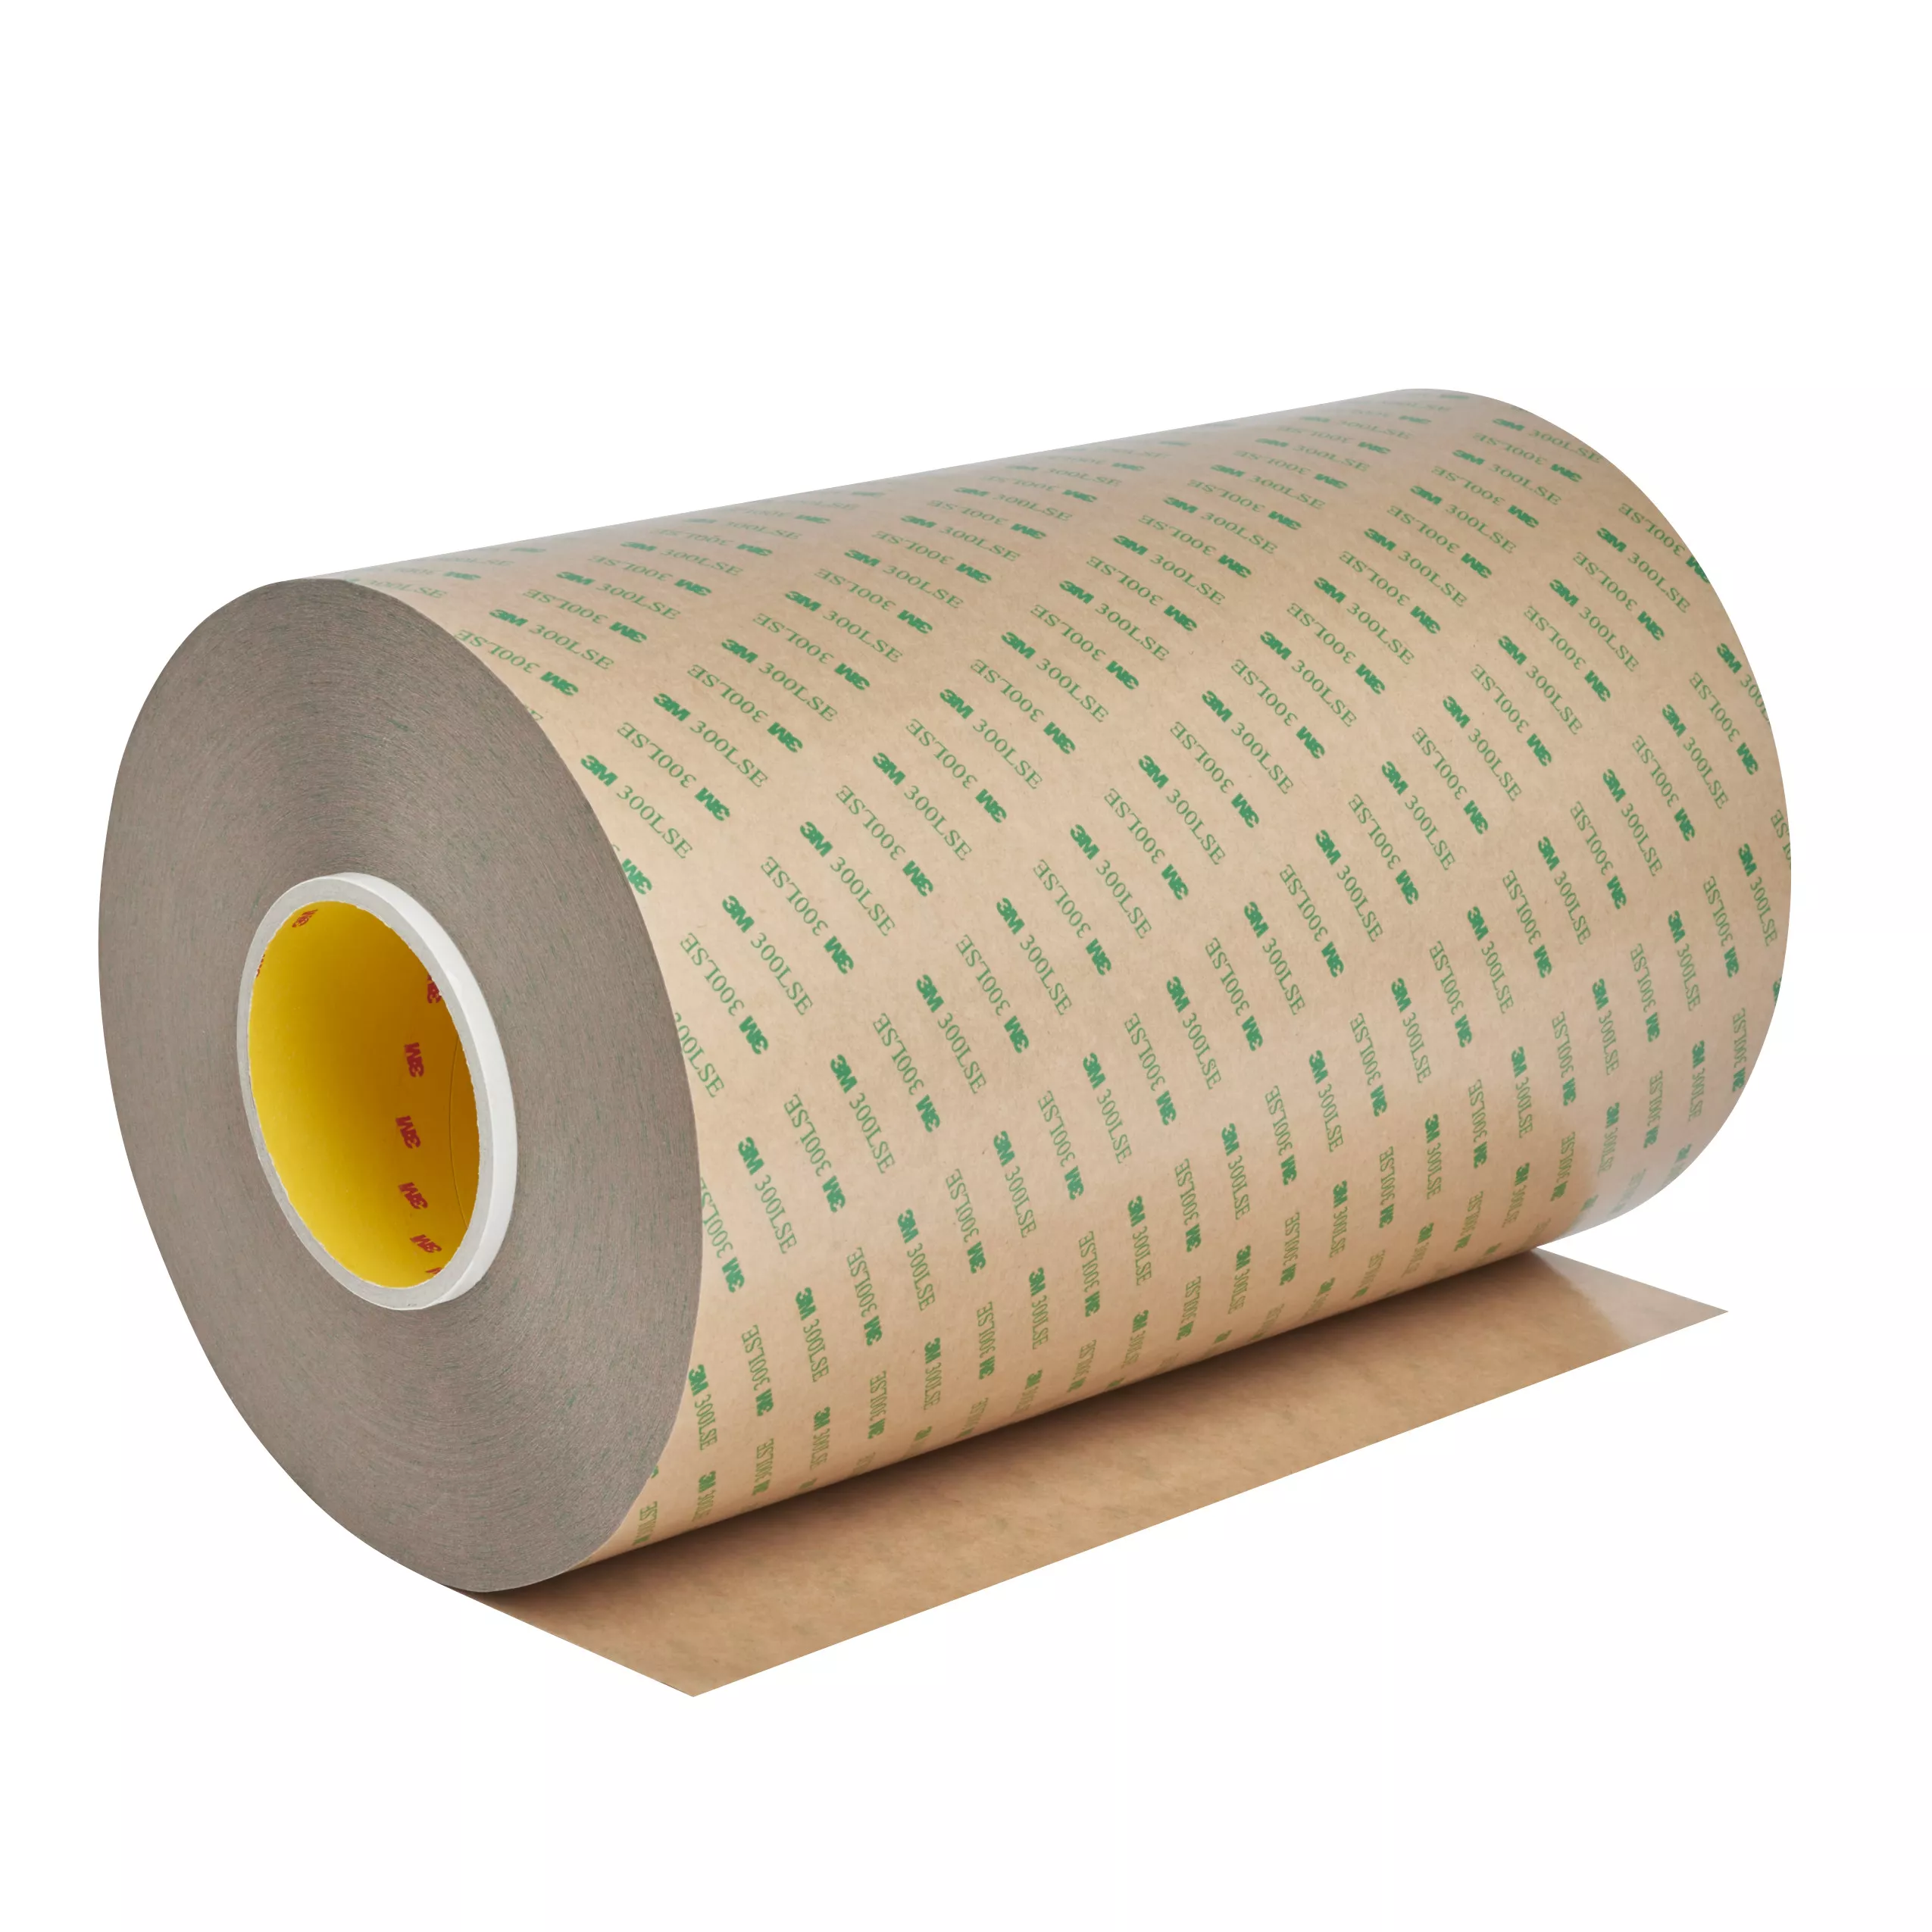 3M™ Adhesive Transfer Tape 9472LE, Clear, 1 in x 60 yd, 5.2 mil, 9
Roll/Case